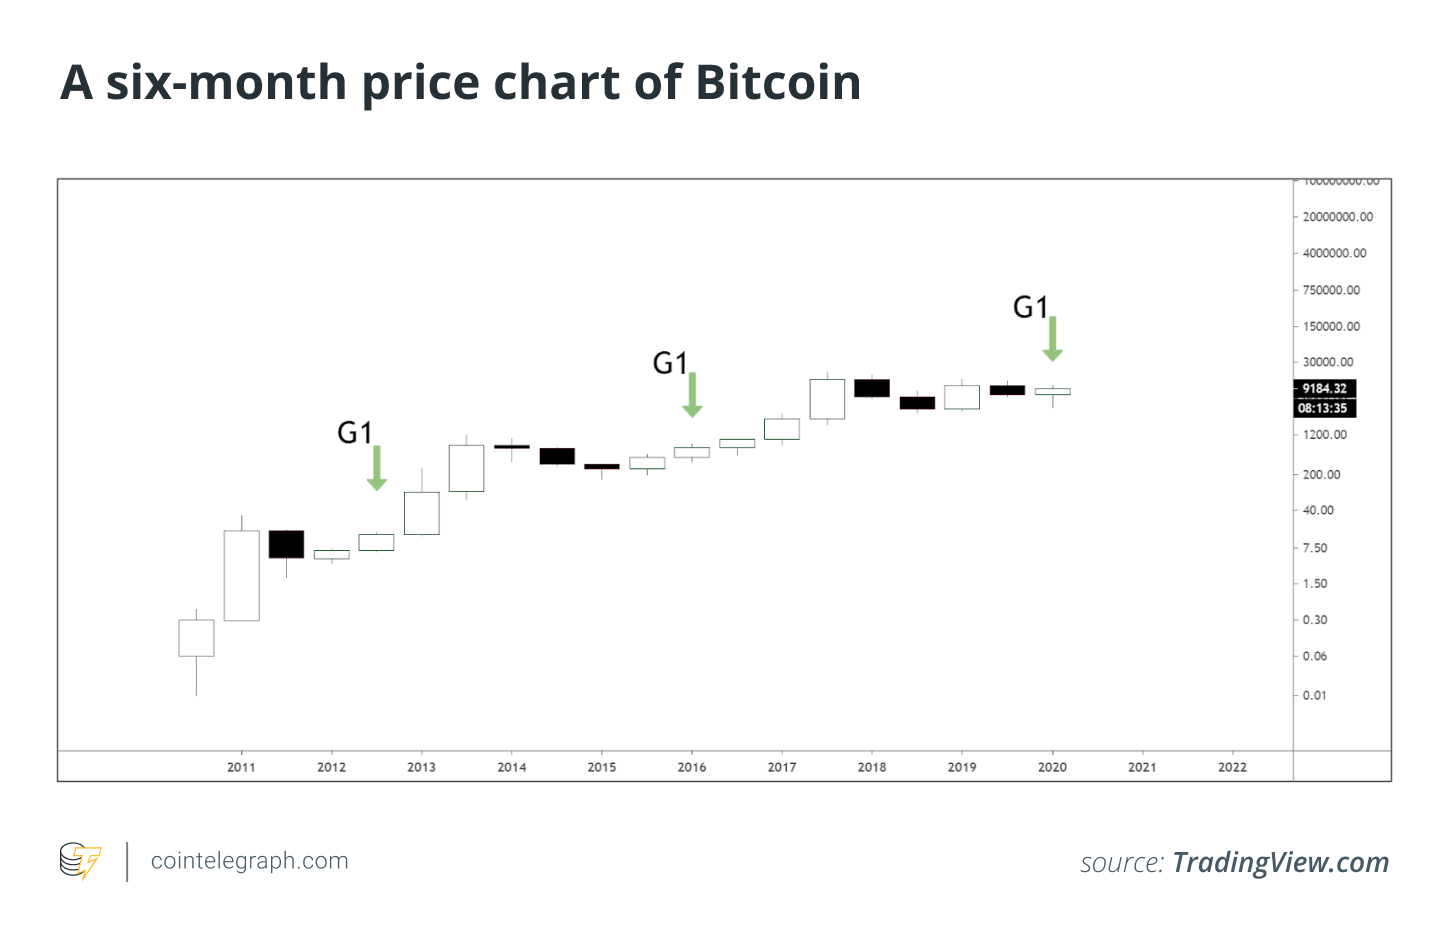 A six-month price chart of Bitcoin